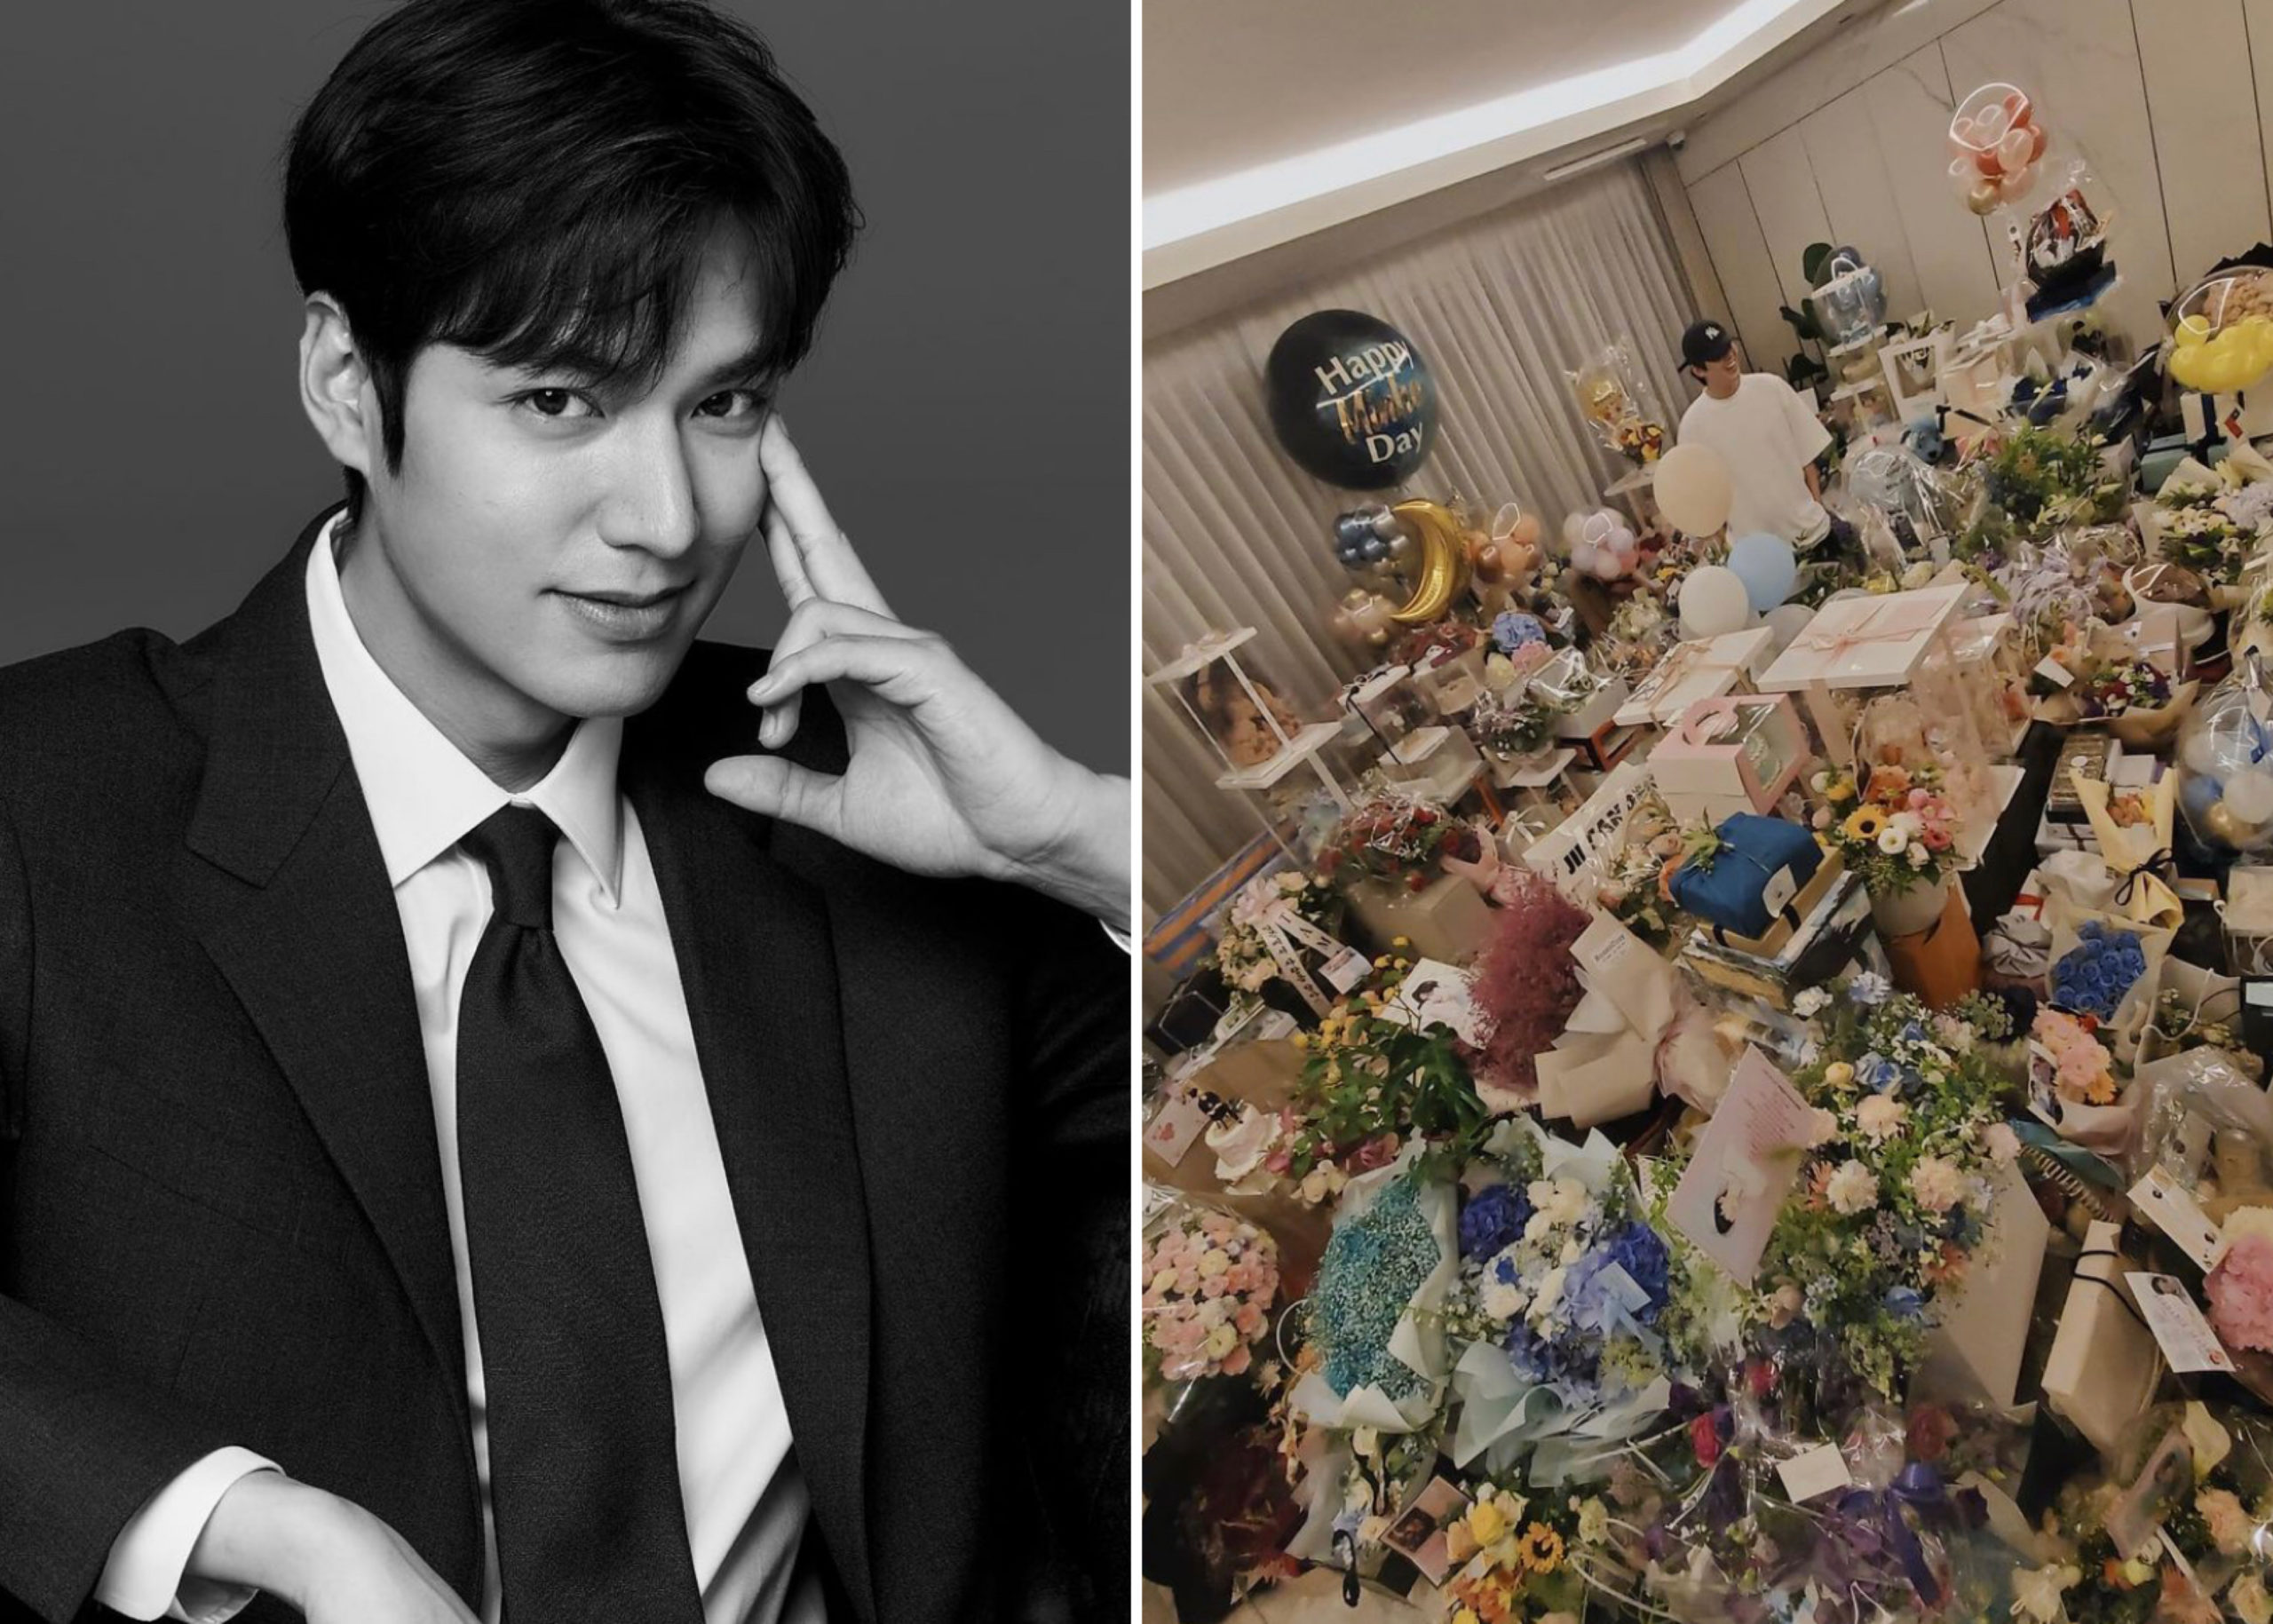 Popular South Korean Actor, Lee Min-ho Celebrates 34th Birthday With Roomful Of Gifts